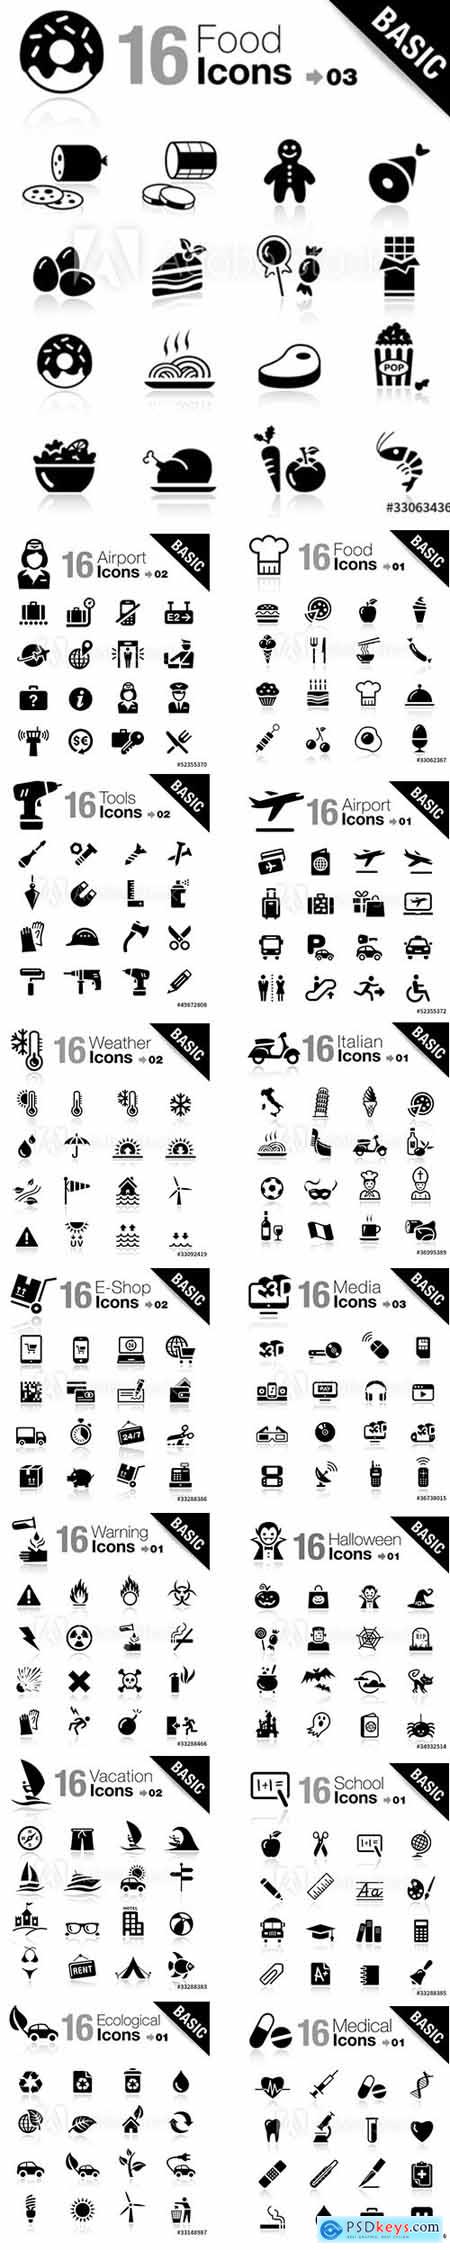 Vector Icons Set - Basic Icons Pack Vol 3